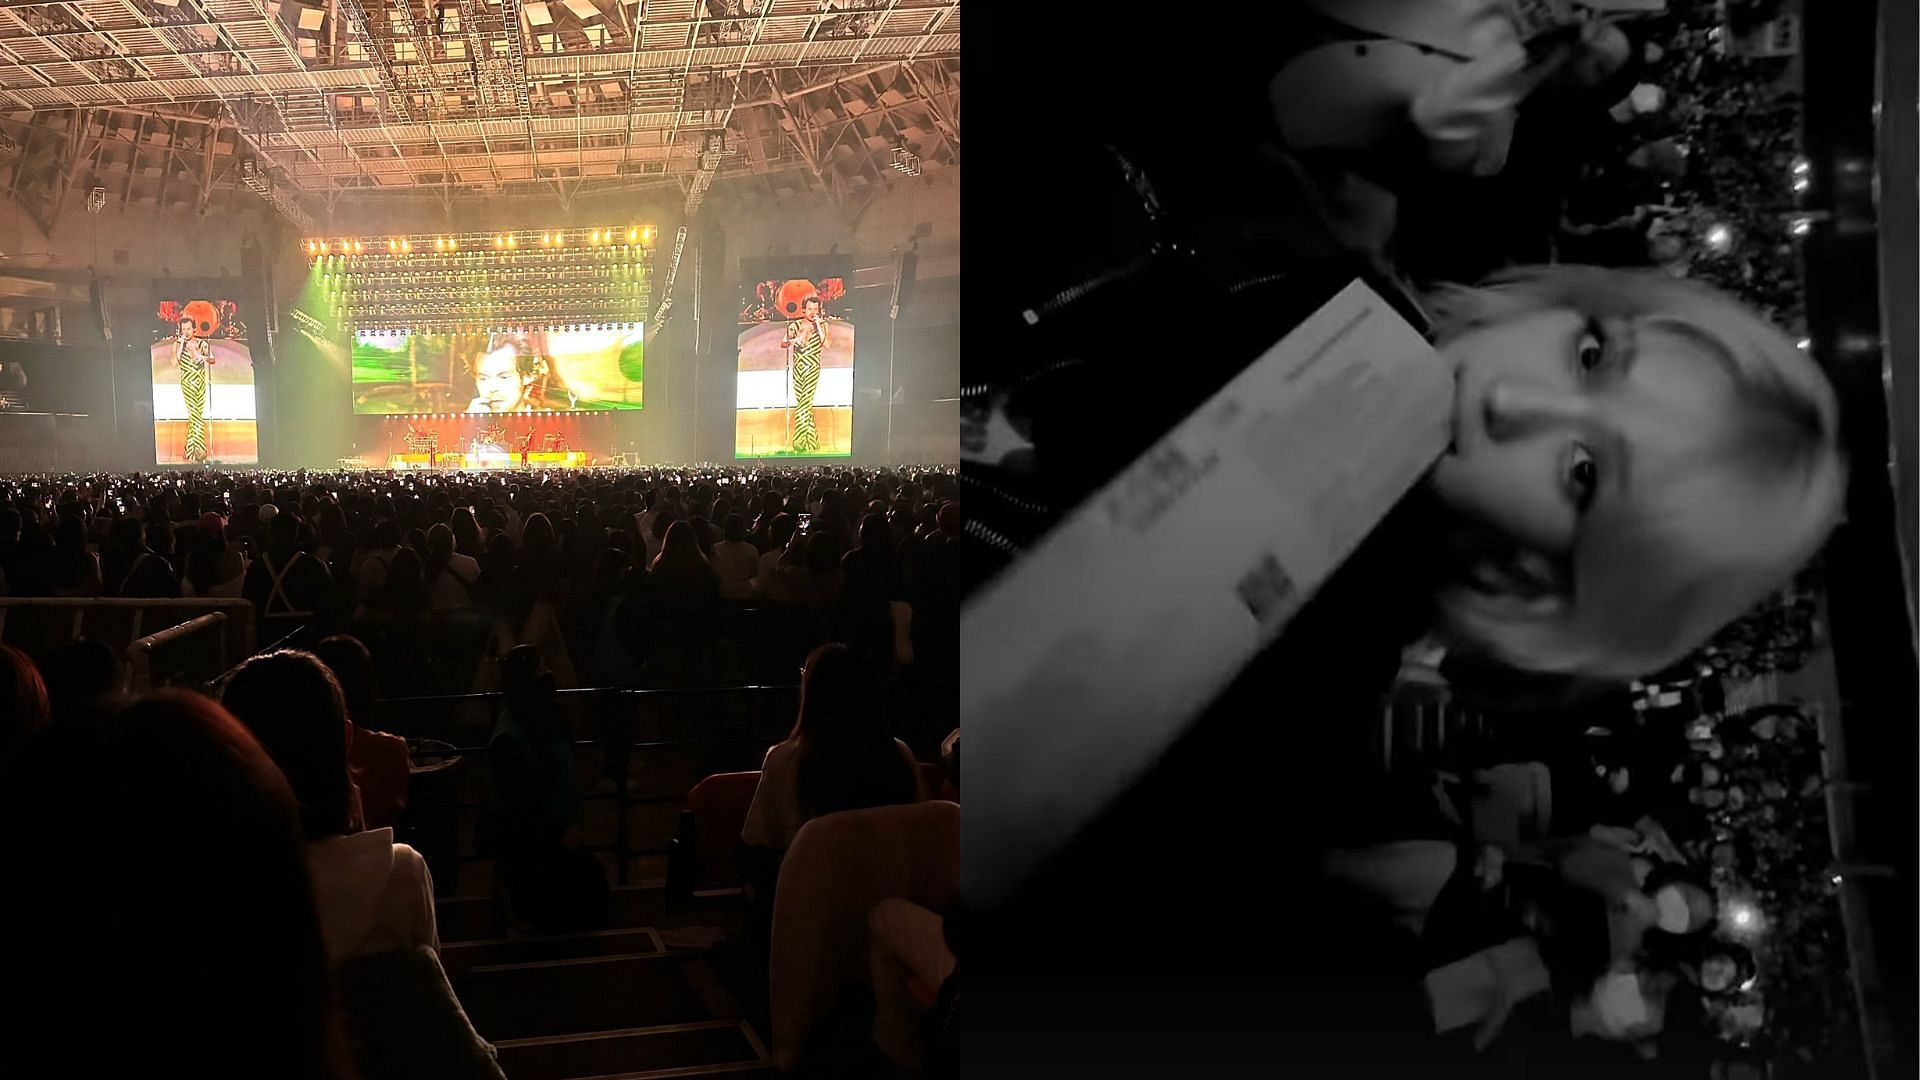 Another K-pop idol who was spotted enjoying herself at the Harry Styles concert was THEBLACKLABEL&#039;s Somi, who is best known for her singles DUMB DUMB and BIRTHDAY. (Images via Instagram/ @somsomi0309)